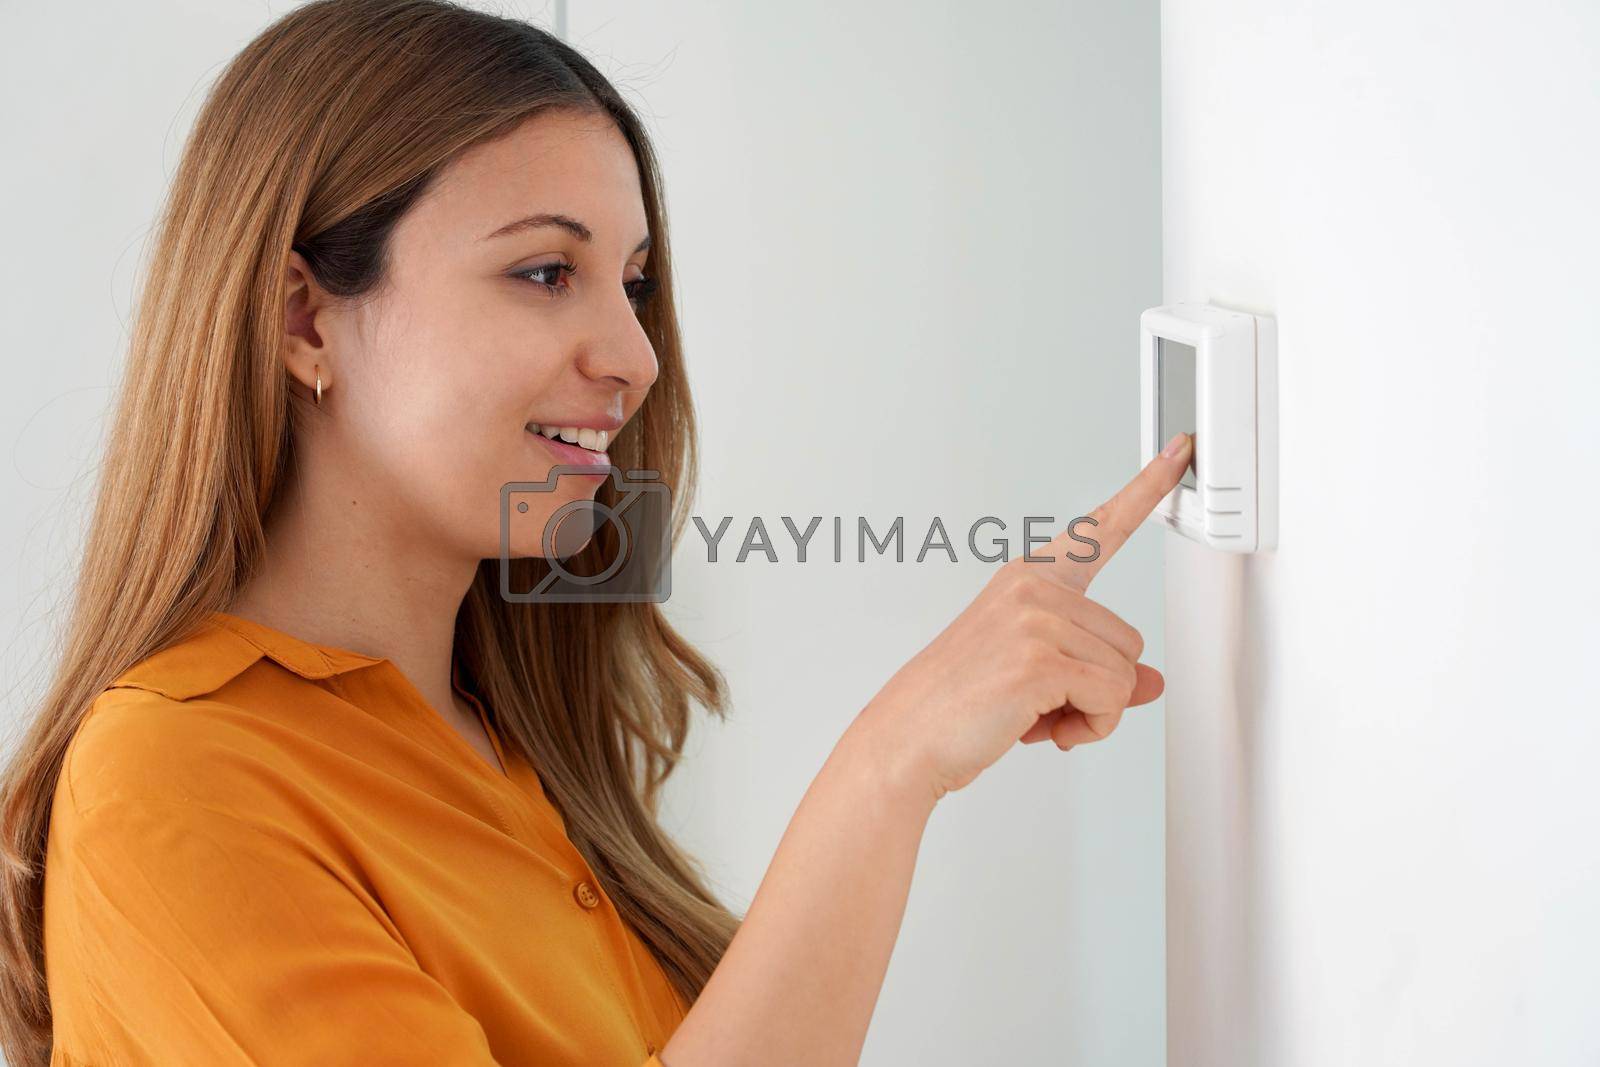 Royalty free image of Portrait of beautiful woman lowering the temperature for energy saving. Woman adjusting digital central heating thermostat at home. by sergio_monti